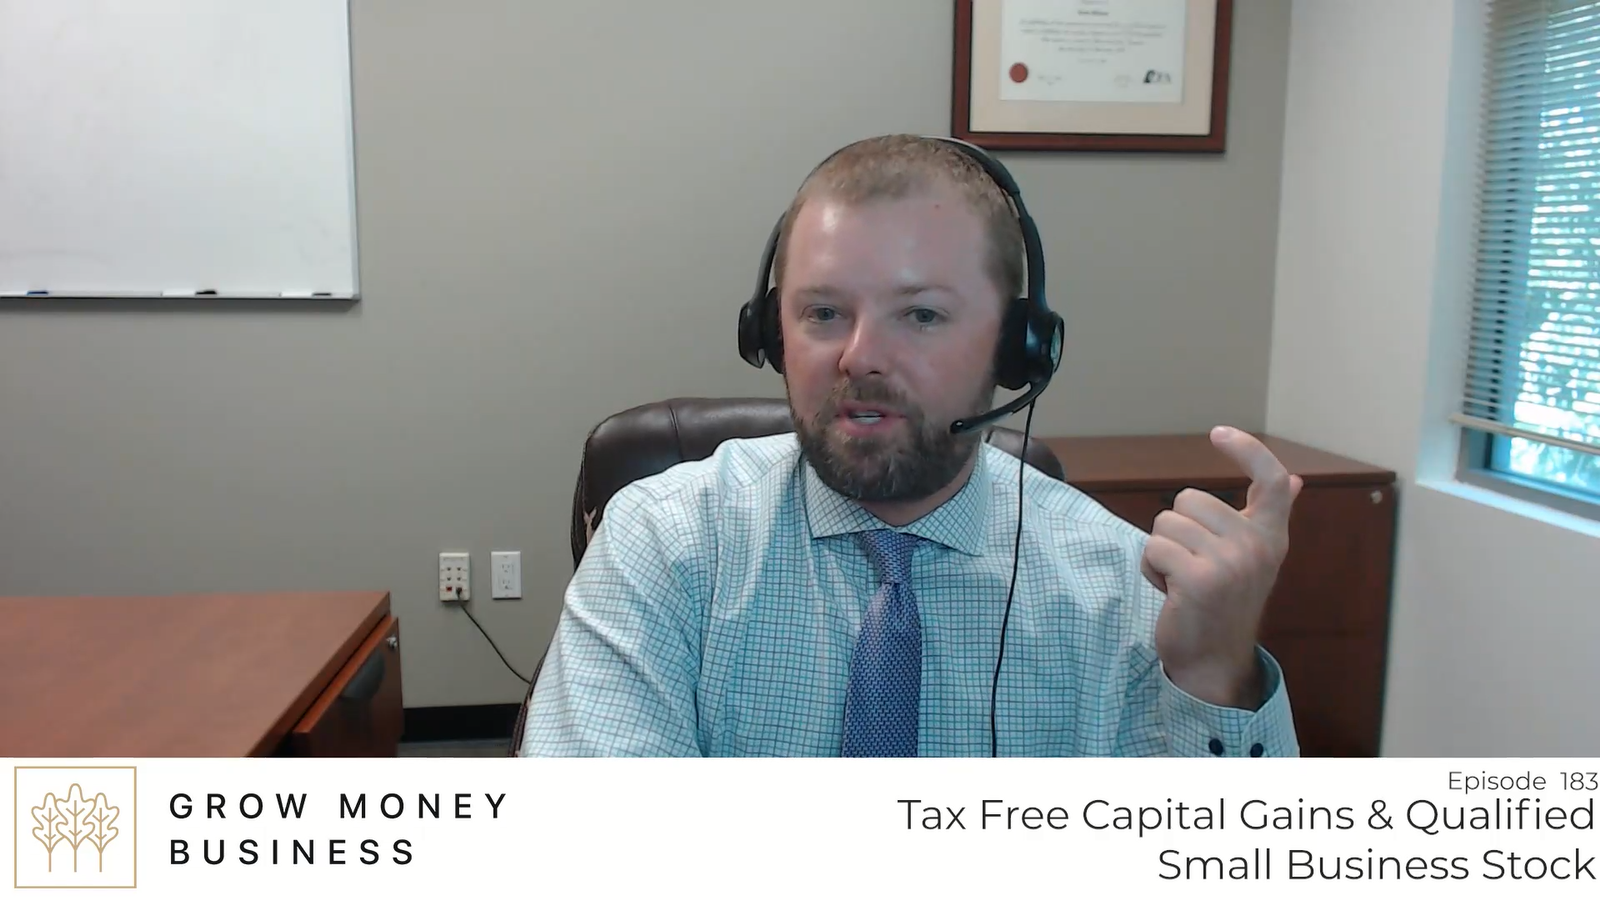 Tax-Free Capital Gains & Qualified Small Business Stock